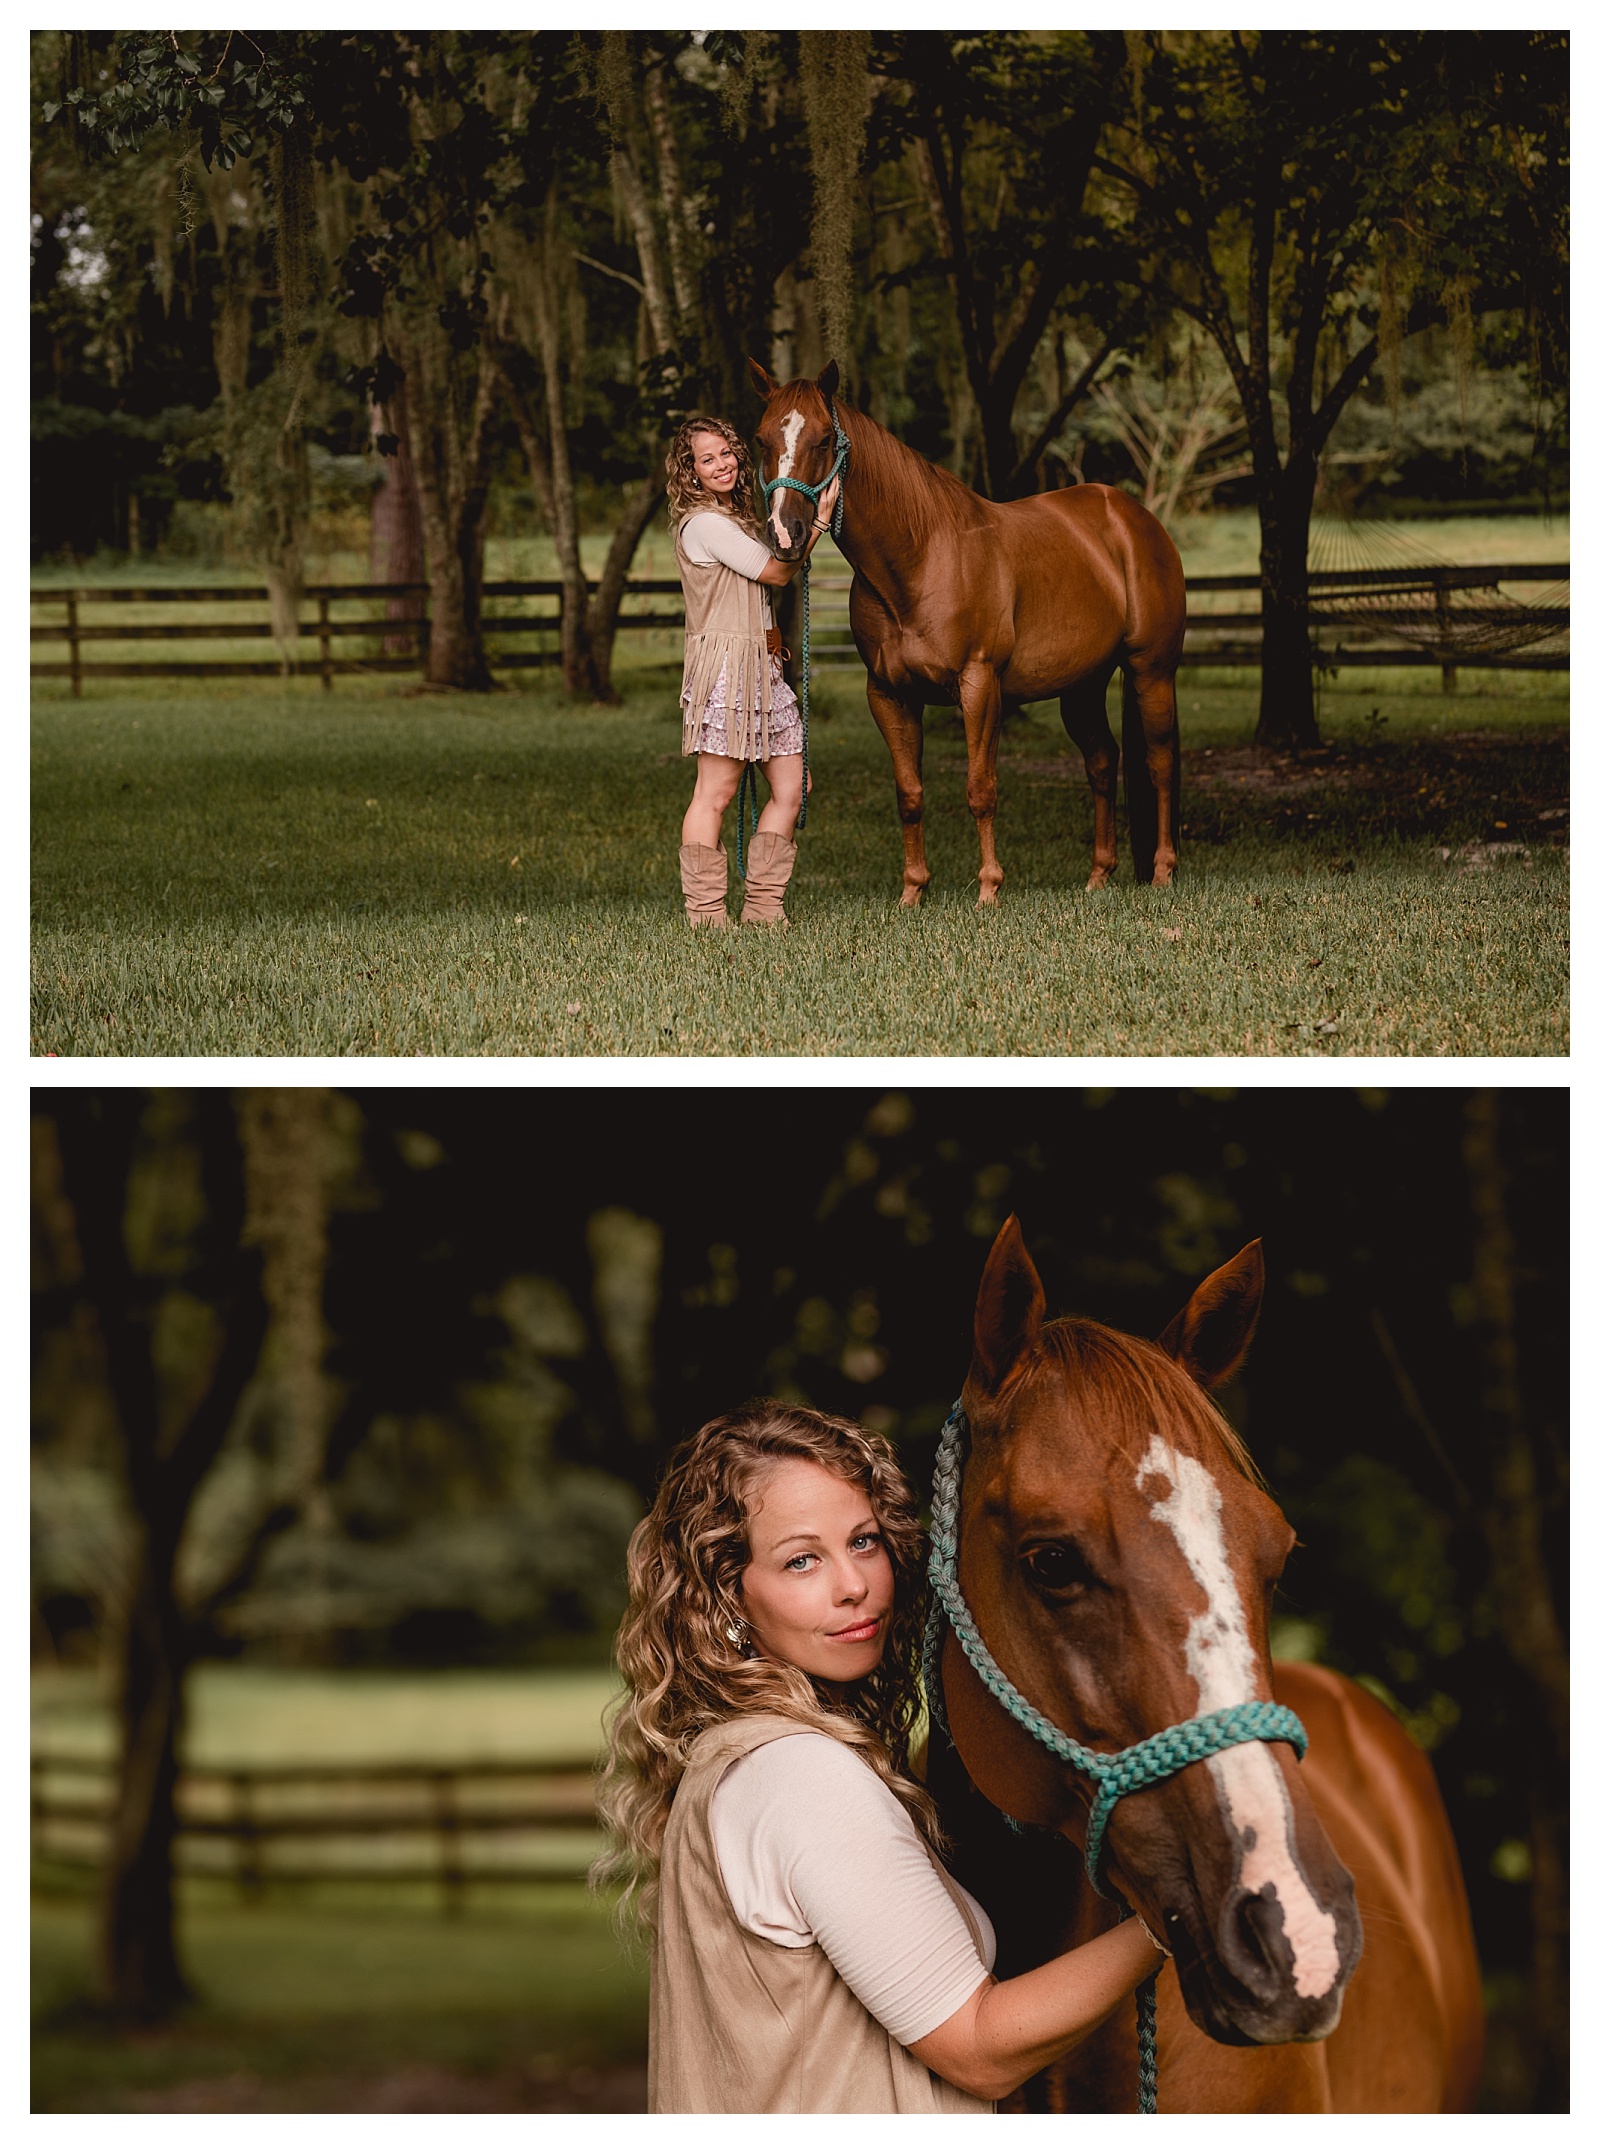 Equestrian photoshoot in North Florida by professional photographyer